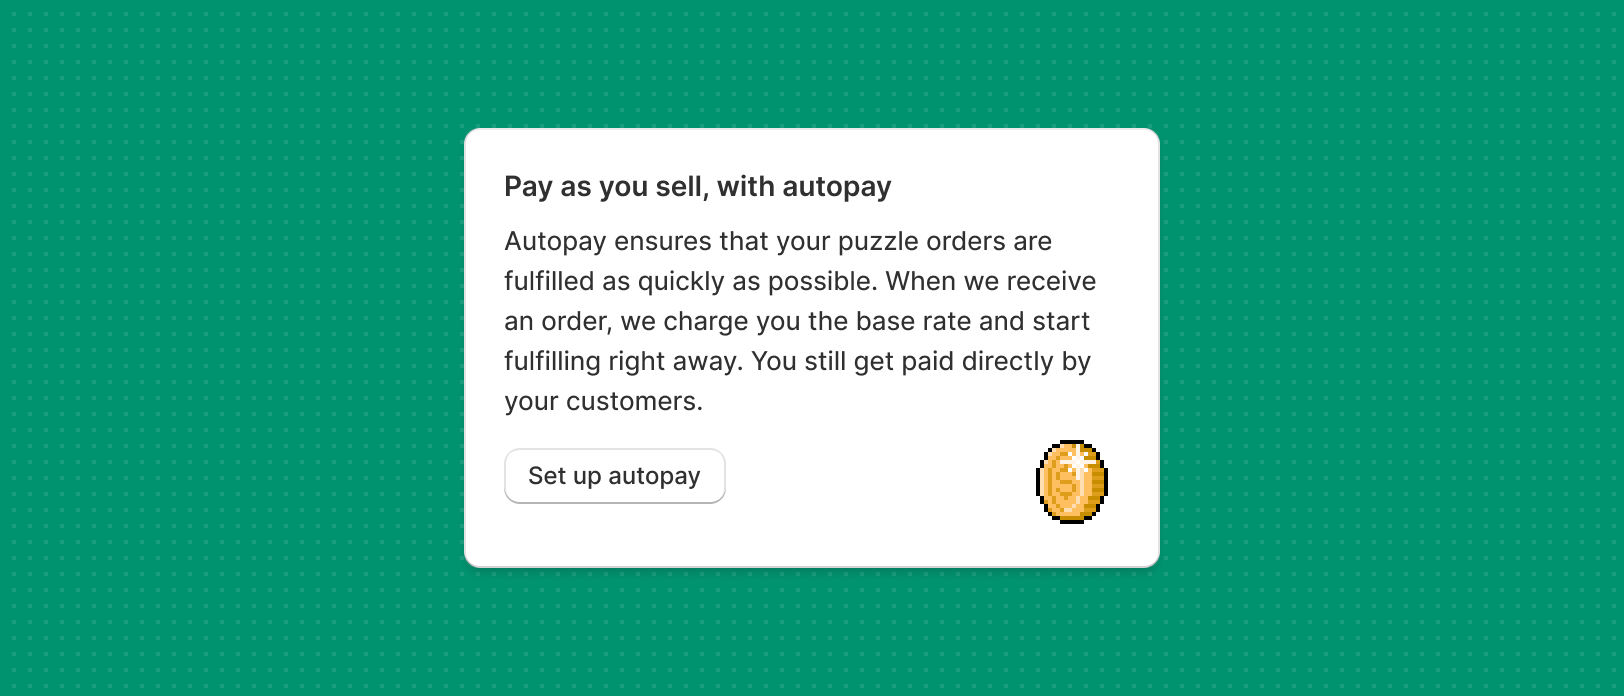 A card that clearly and concisely explains how autopayment works and provides a button for setting it up.